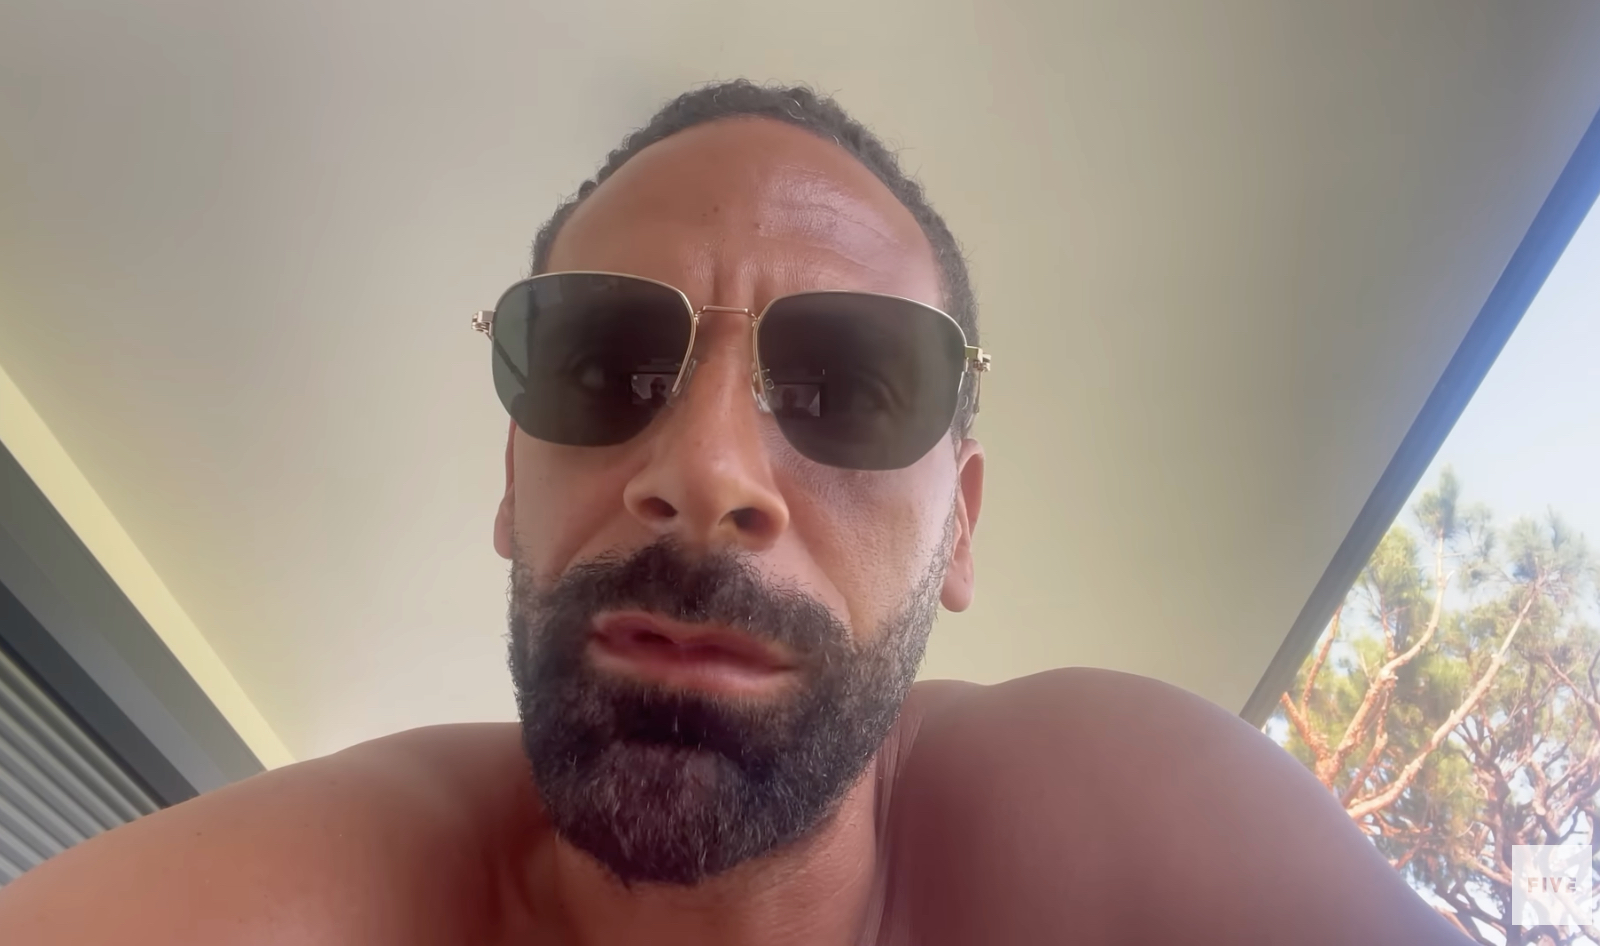 Video: ‘More successful’ – Rio Ferdinand says Man United have had a better 2022/23 season than Arsenal CaughtOffside